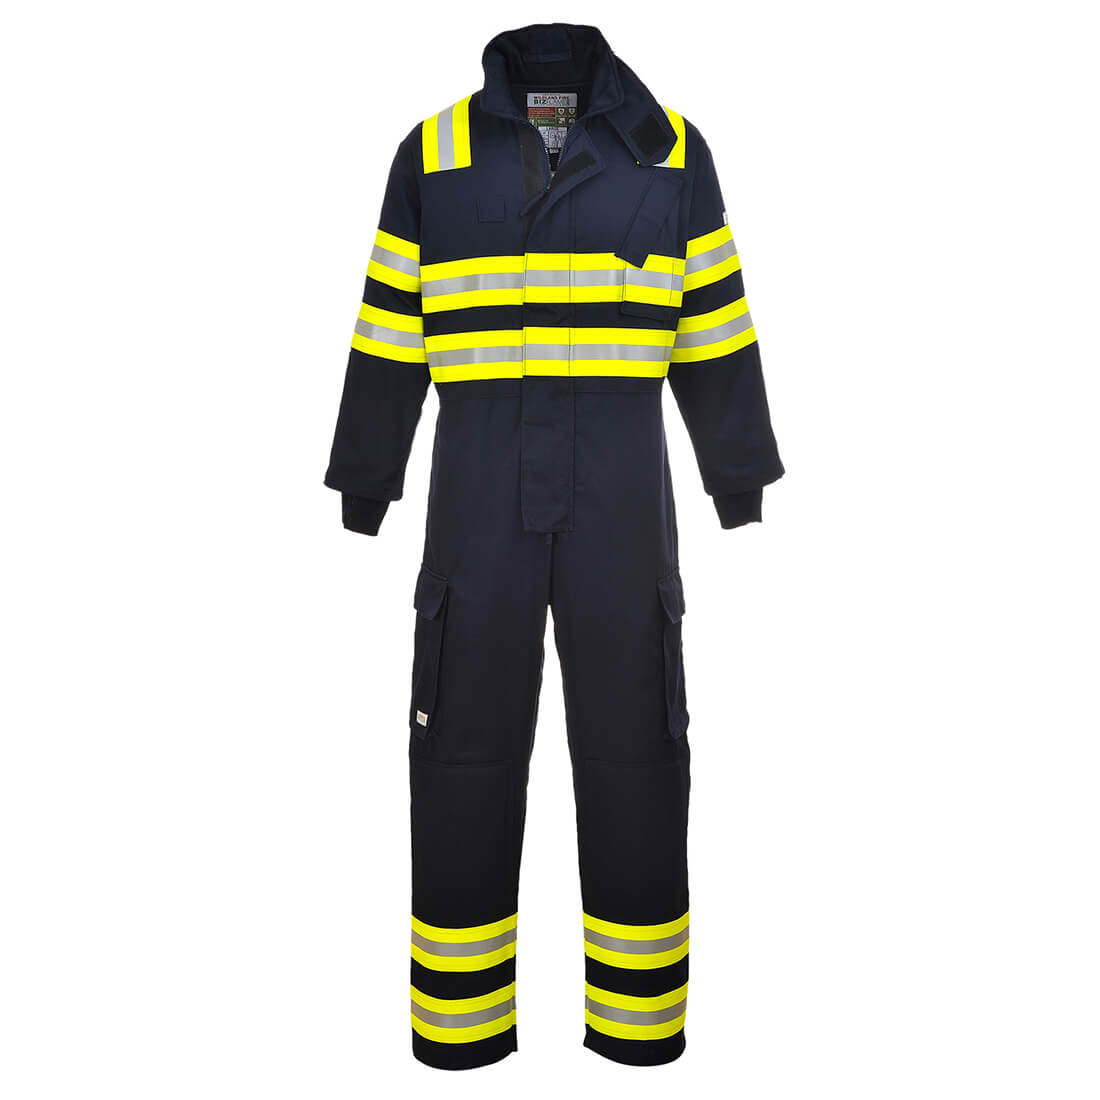 BizFlame Wildland Fire Coverall Navy XL